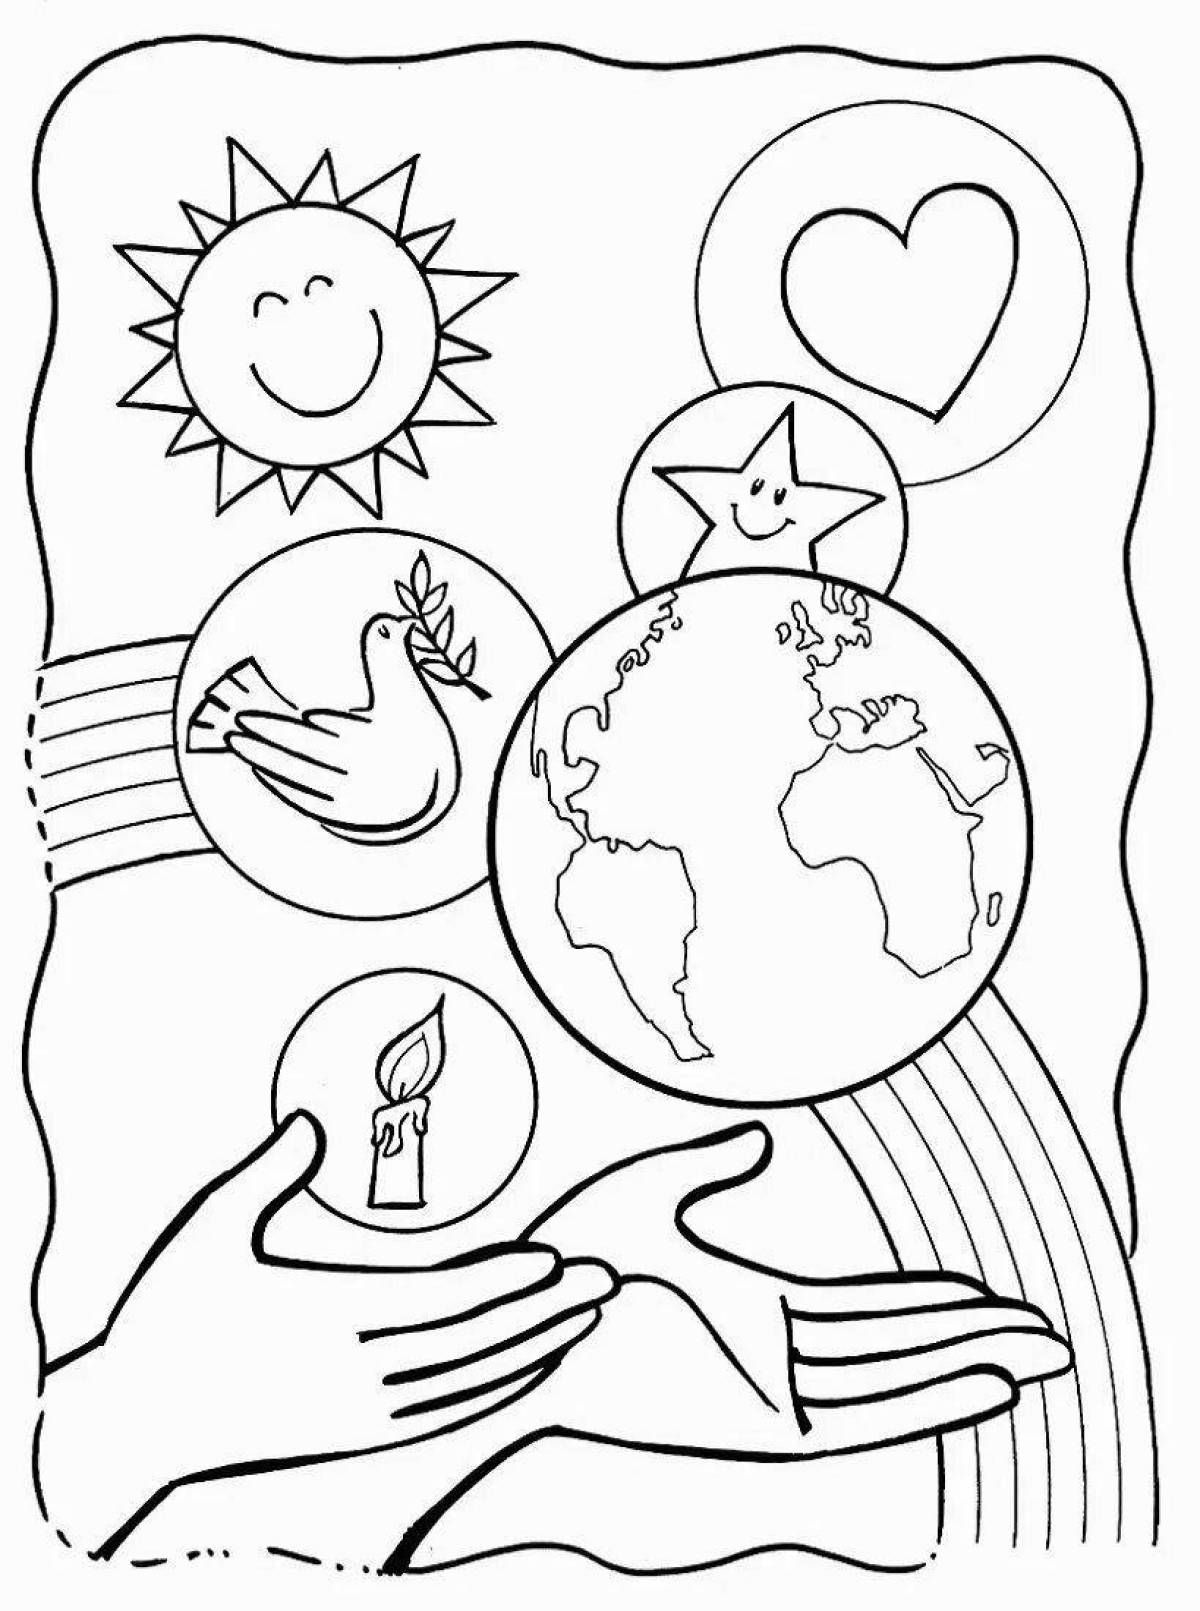 Playful world peace coloring page